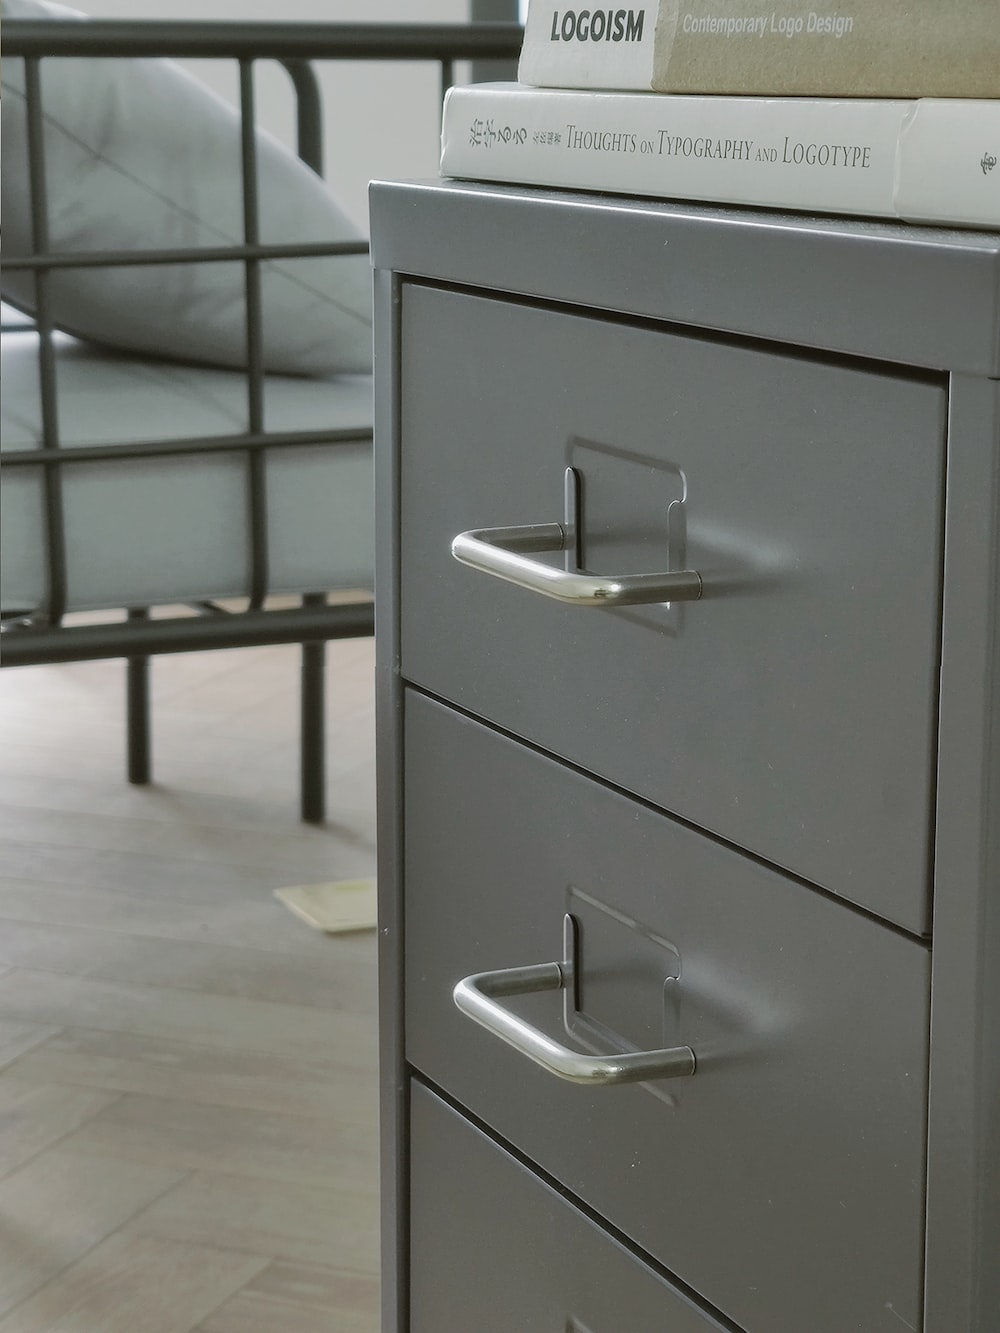 What is the standard size of a 4-drawer filing cabinet?